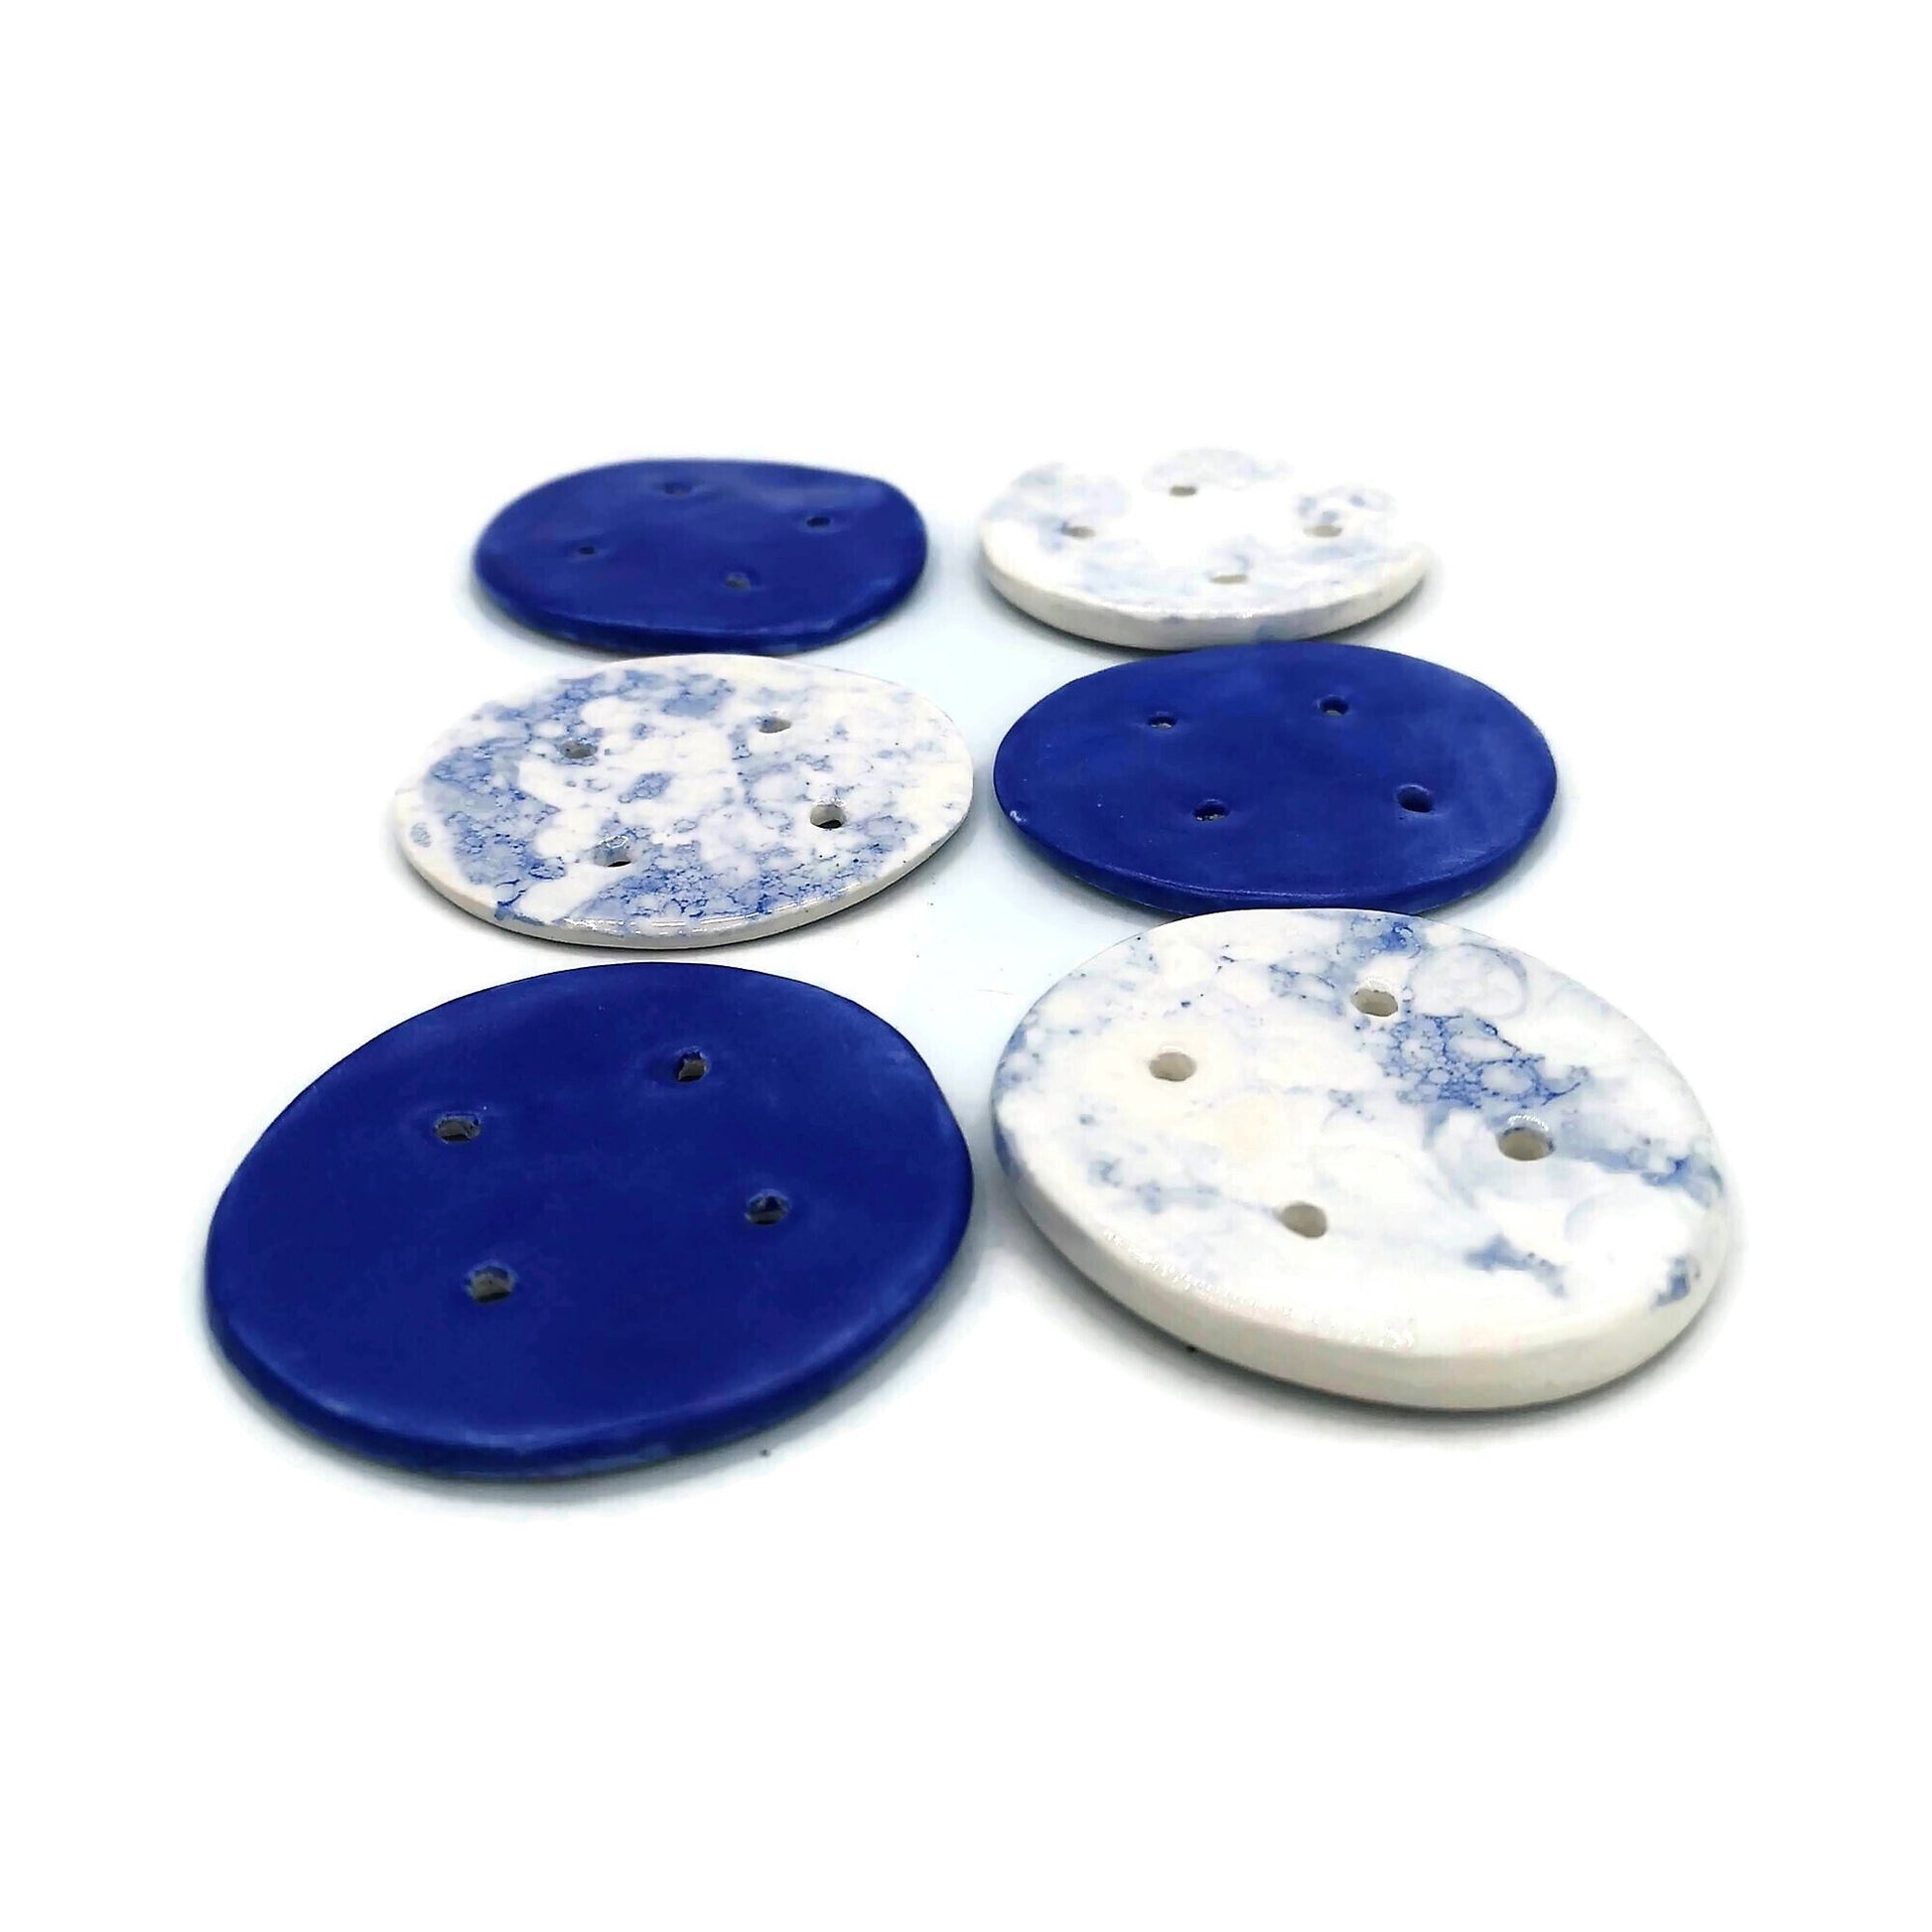 6Pc Extra Large Handmade Ceramic Blue Buttons, Round Shape Assorted Sewing Buttons 65mm, Best Gifts For Her, Novelty Buttons Lot - Ceramica Ana Rafael